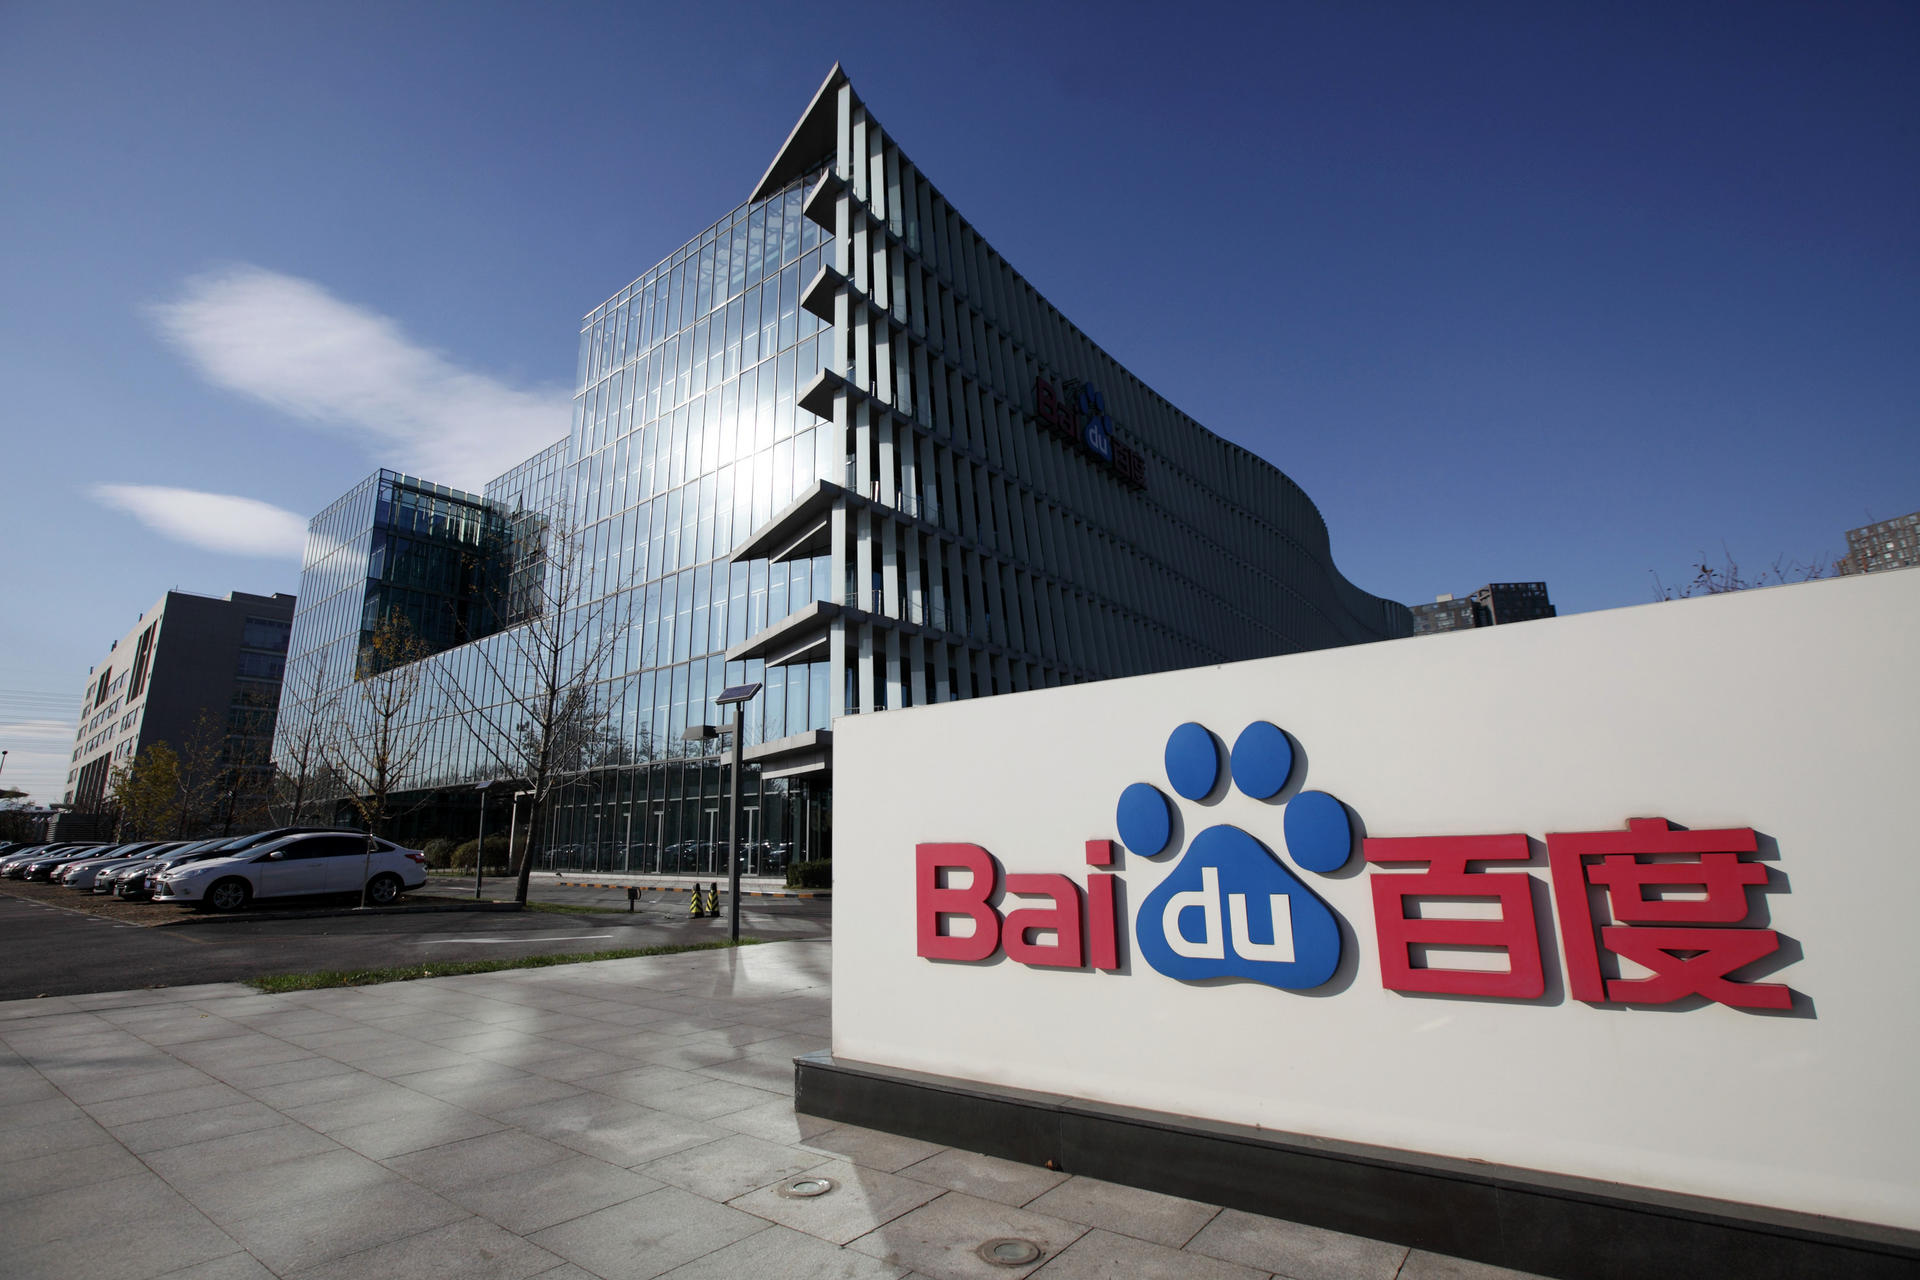 Baidu has adopted a more conservative approach to spending in preparing for the mobile internet era. Photo: Bloomberg